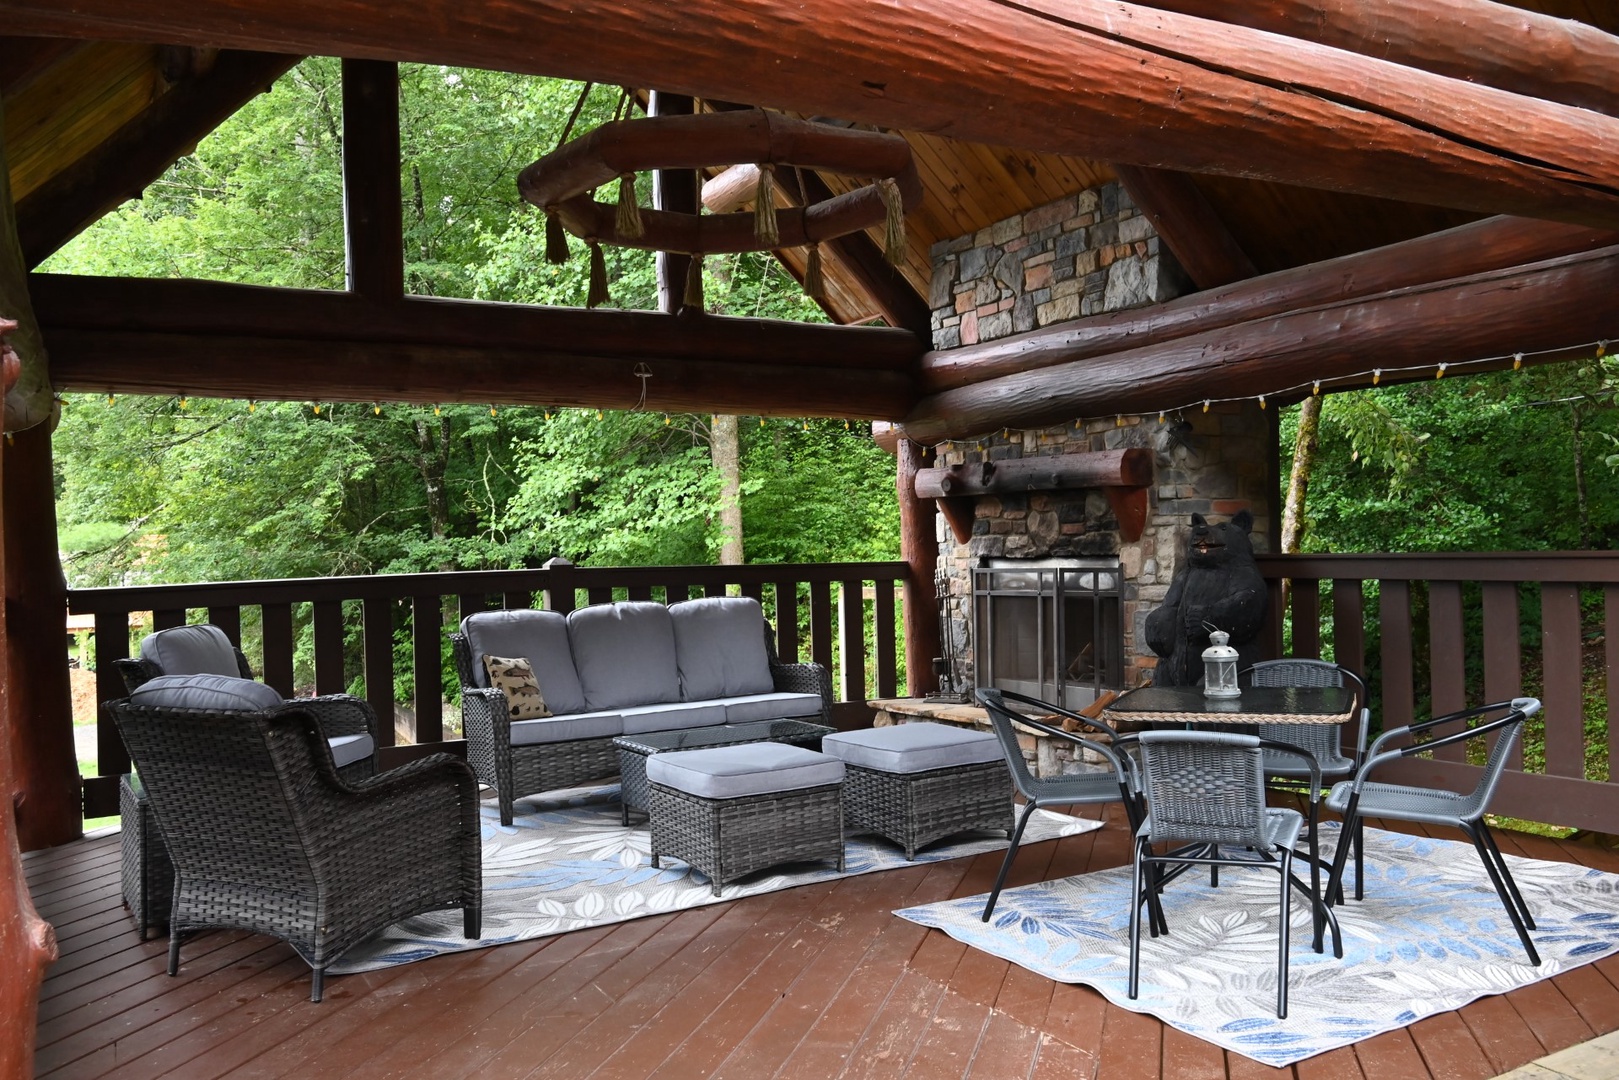 Outdoor Living room with wood burning fireplace